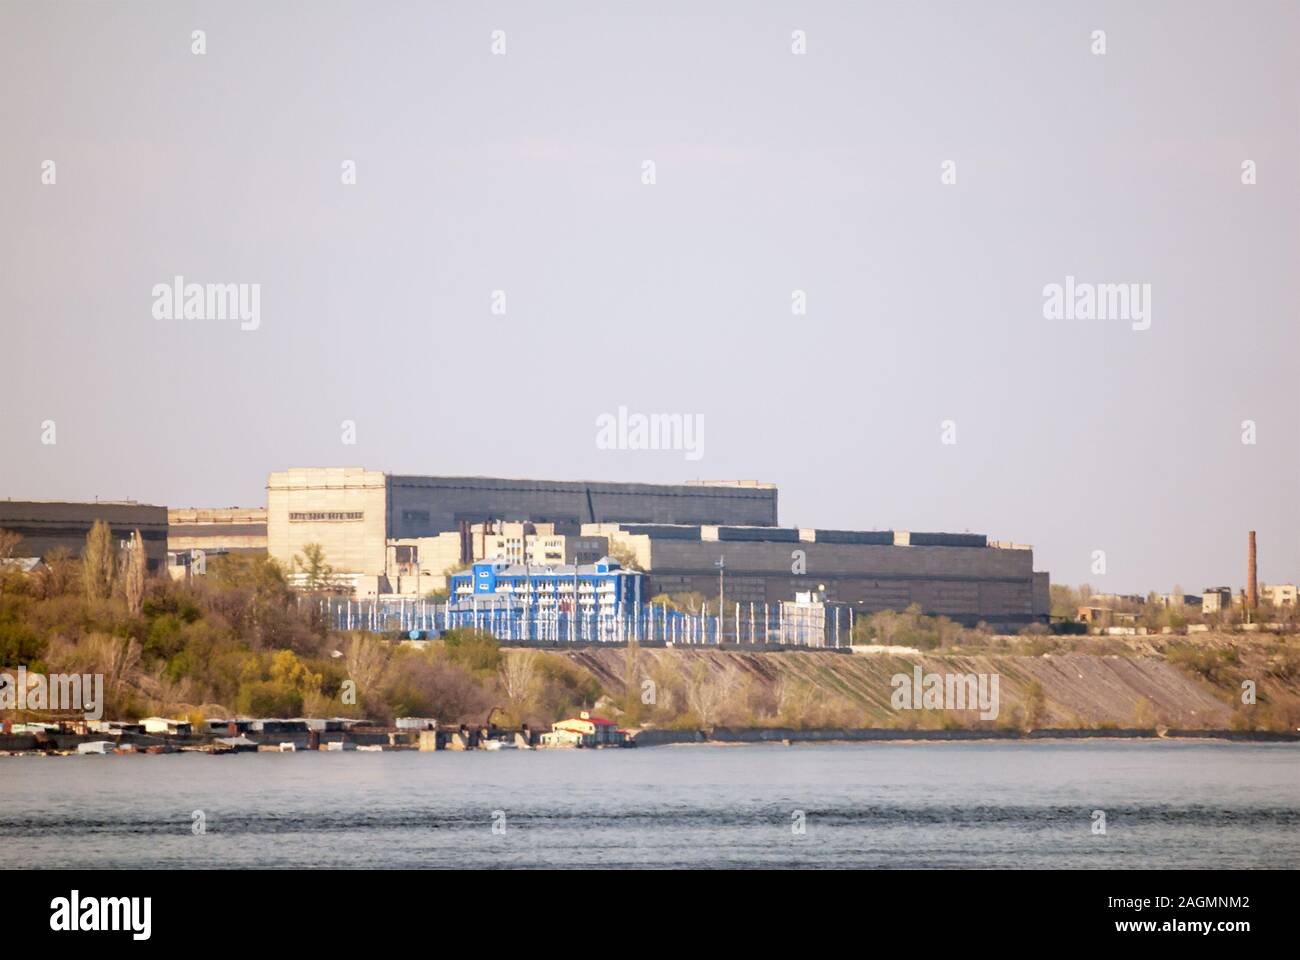 Ironworks located on the river coastline. Industrial landscape. Stock Photo